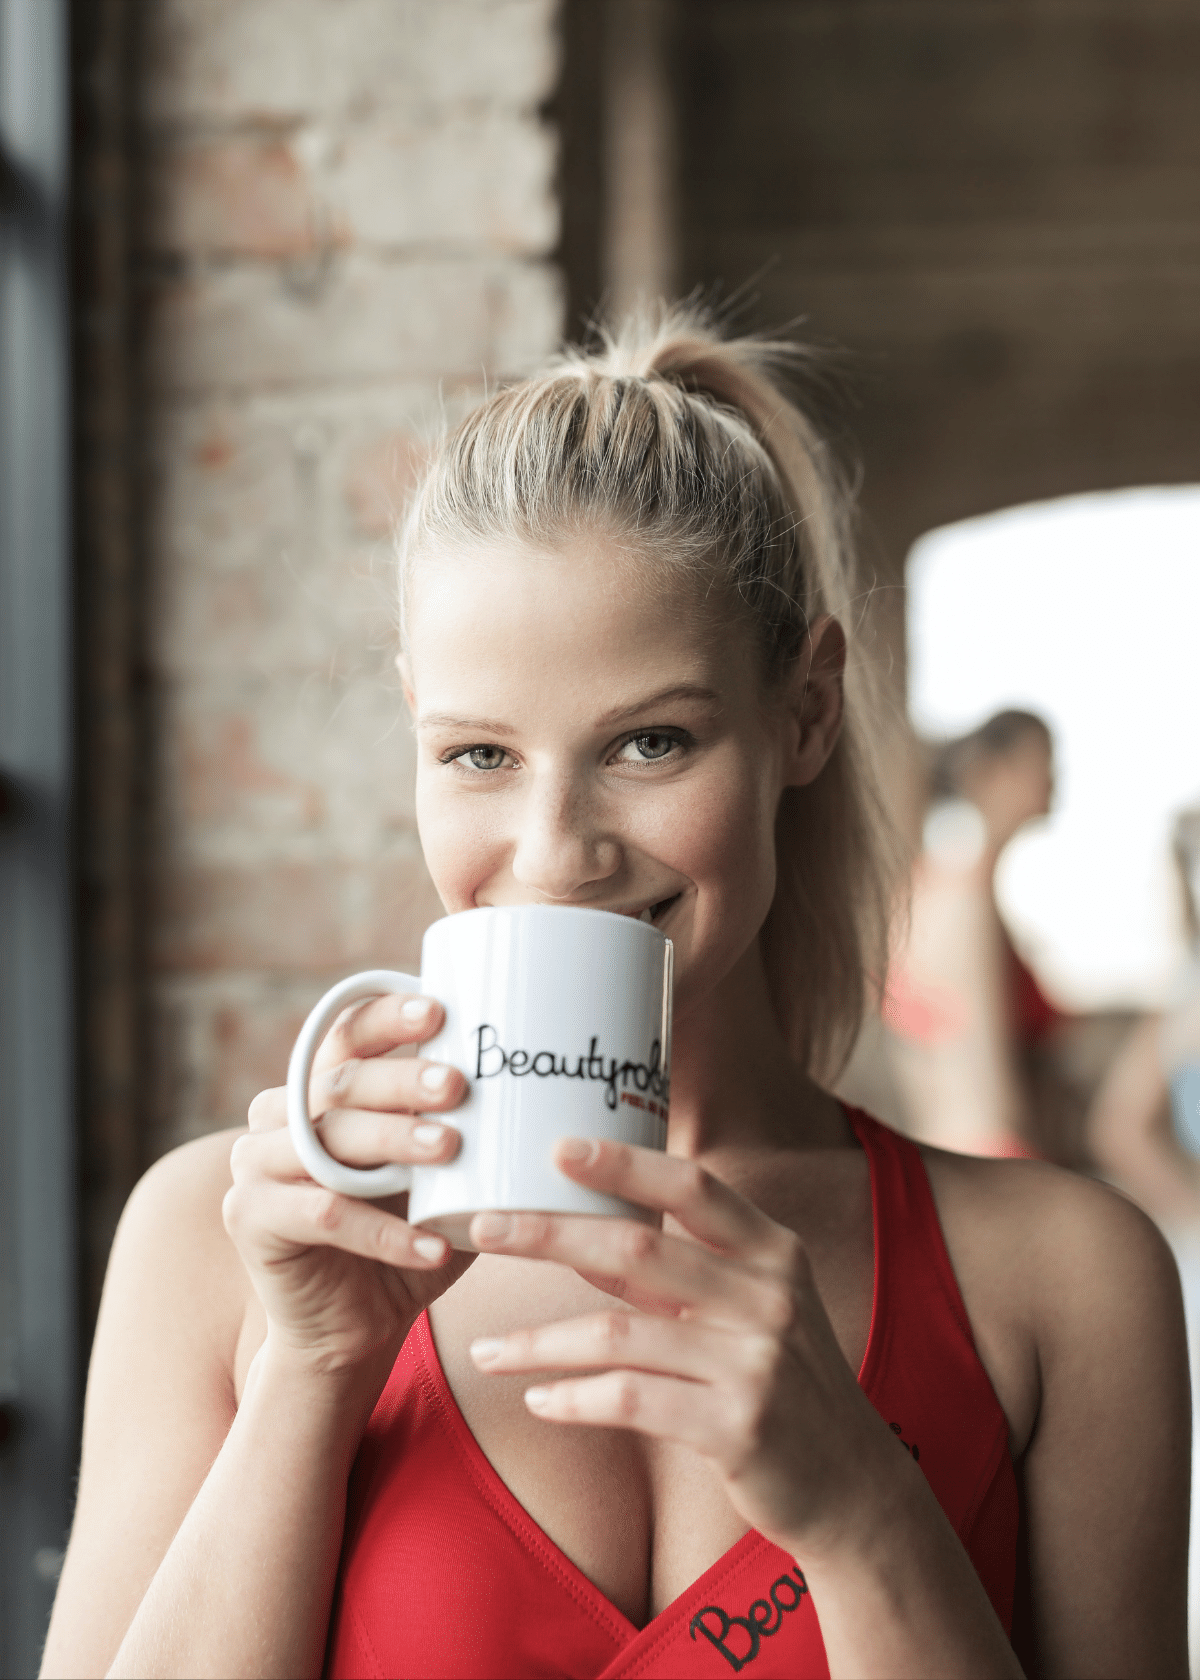 The 5 Best Green Teas for Weight Loss: Why We Love Them